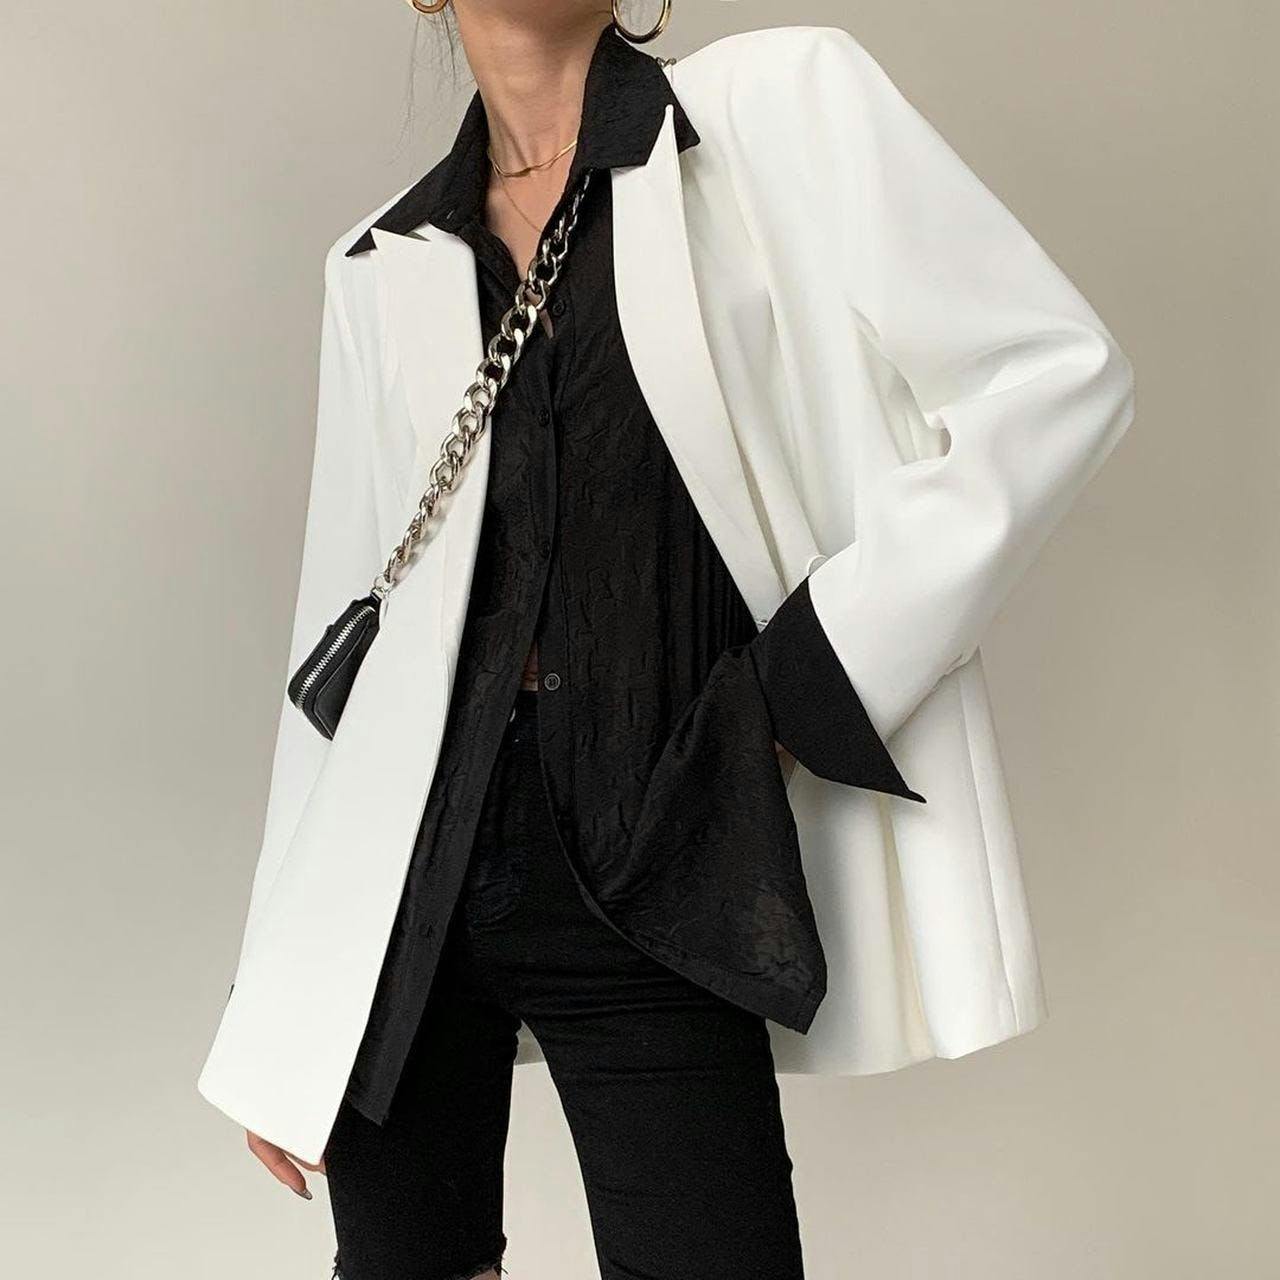 clothing apparel sleeve overcoat coat long sleeve female person human suit